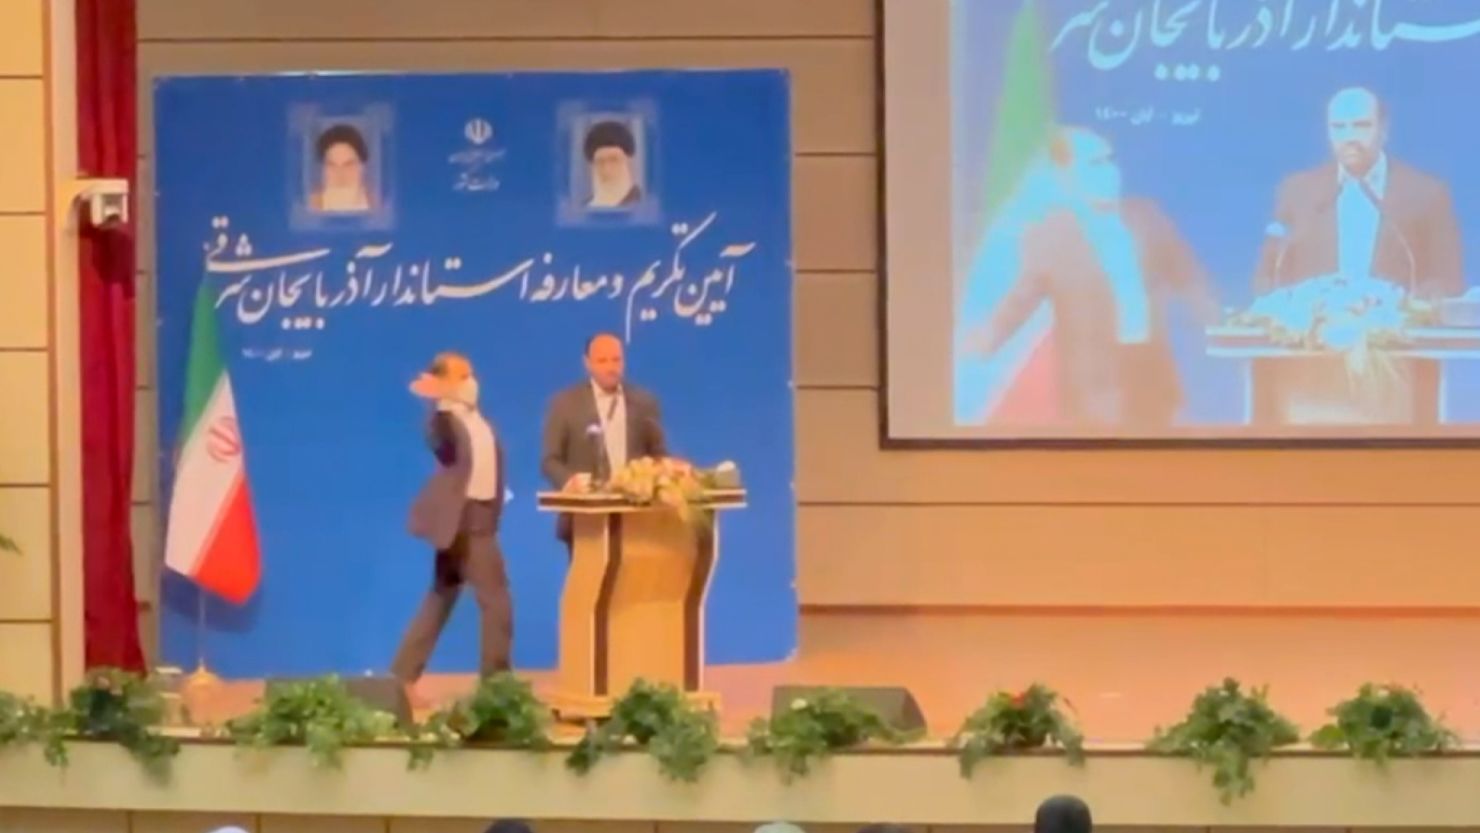 Video shows the moment before Zeinolabedin Khorram was slapped on stage. 